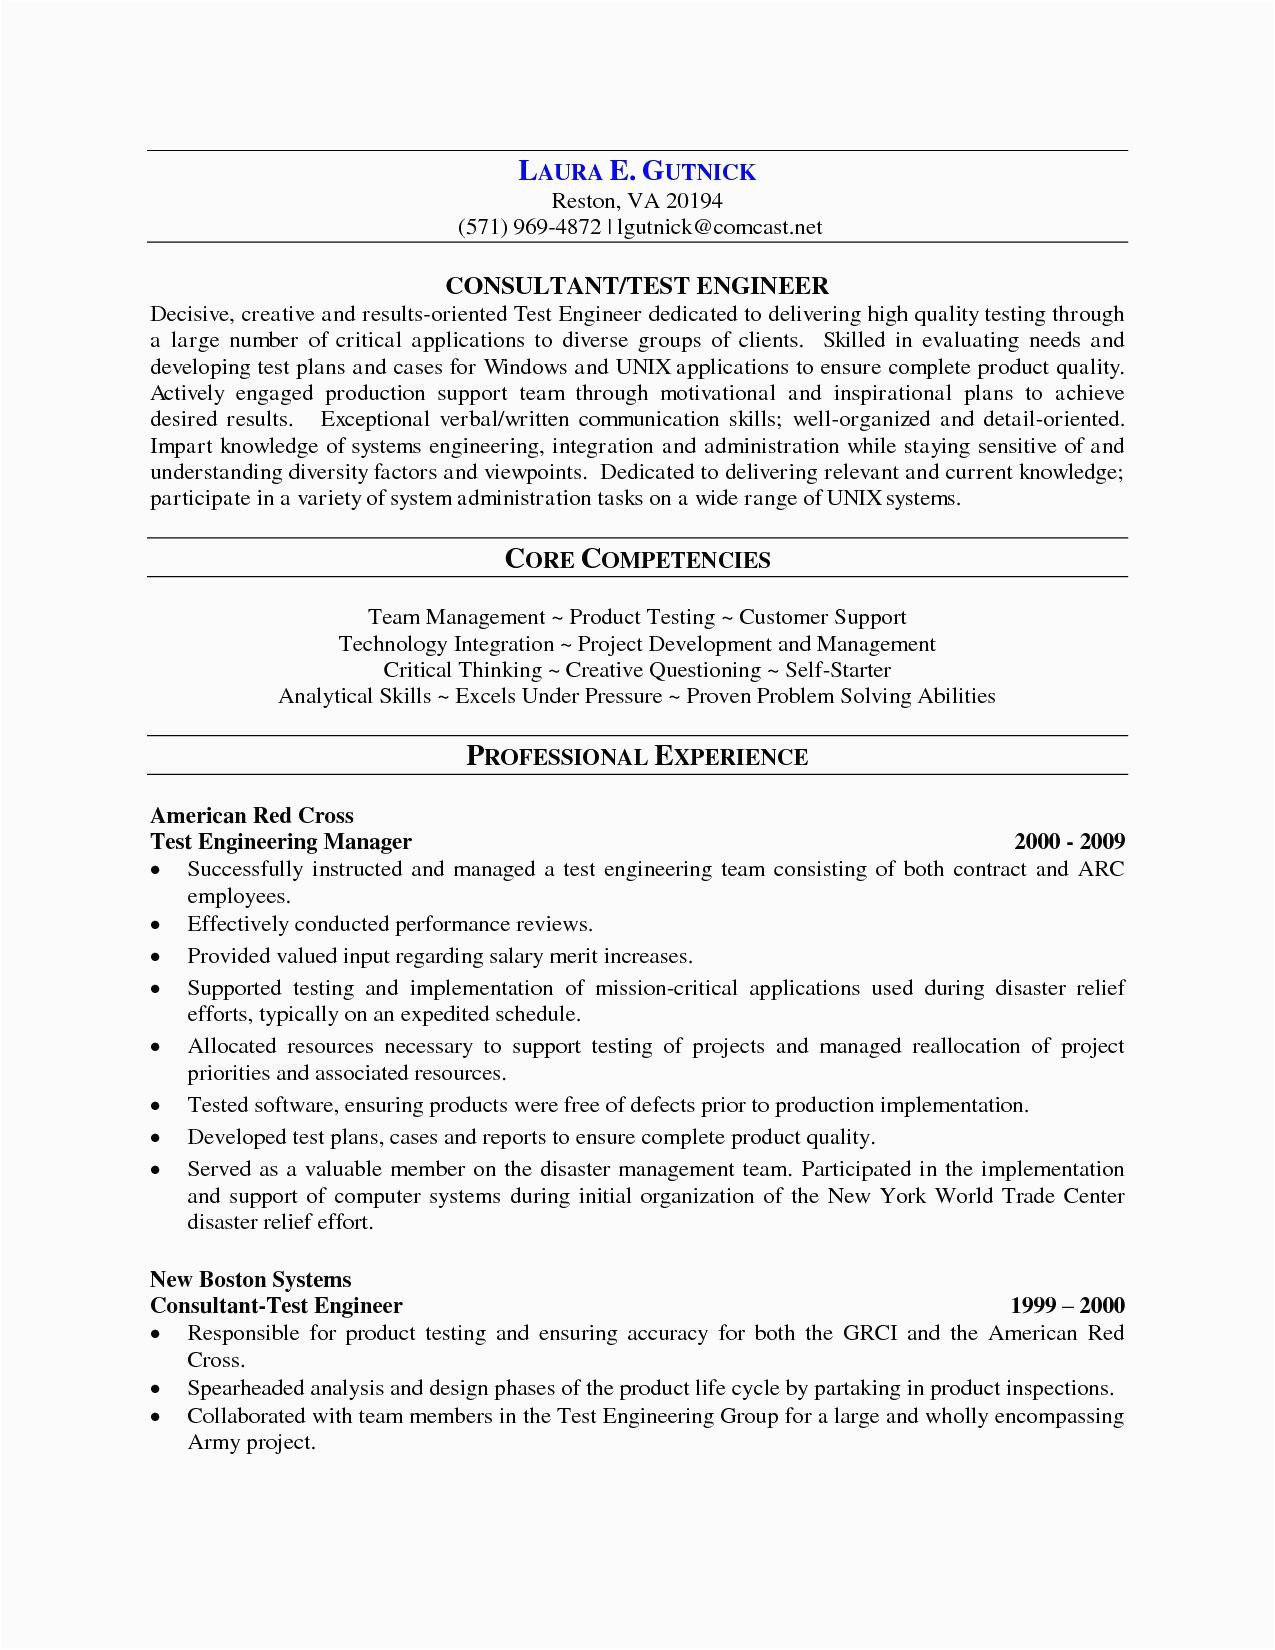 Sample Resume for software Test Engineer with 2 Years Experience Sample Resume for software Tester 2 Years Experience